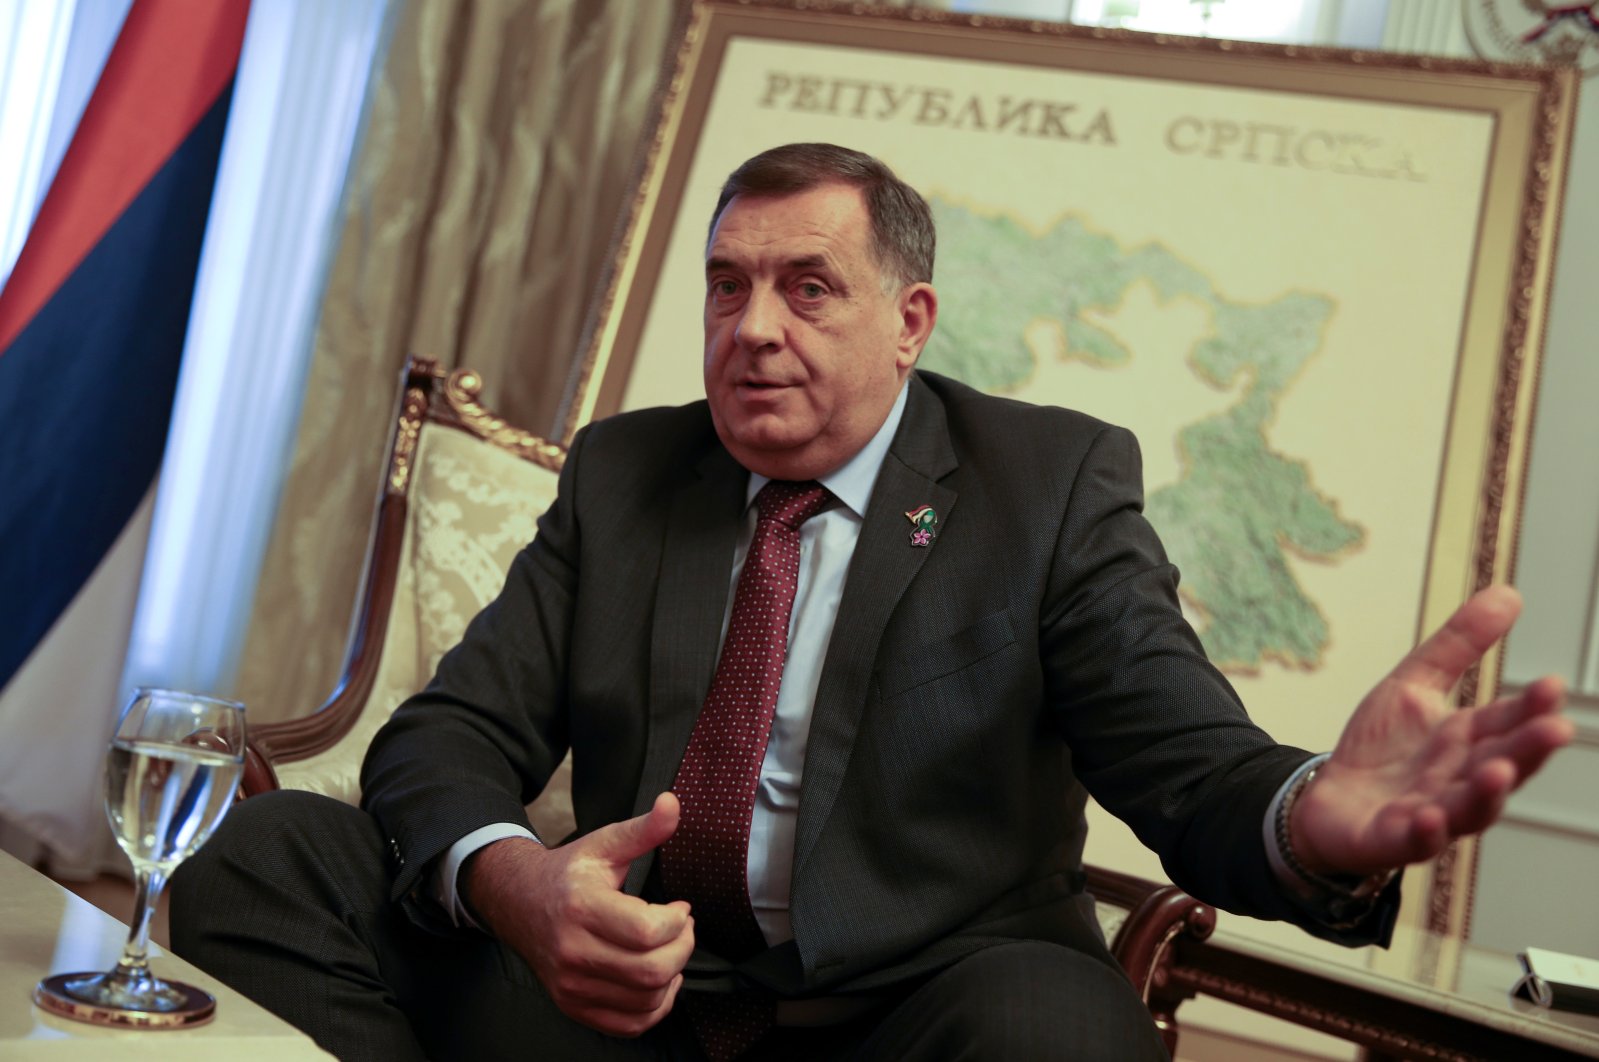 Milorad Dodik, the Serb member of the Presidency of Bosnia and Herzegovina, speaks during an interview in his office in Banja Luka, Bosnia and Herzegovina, Nov. 11, 2021. (Reuters Photo)